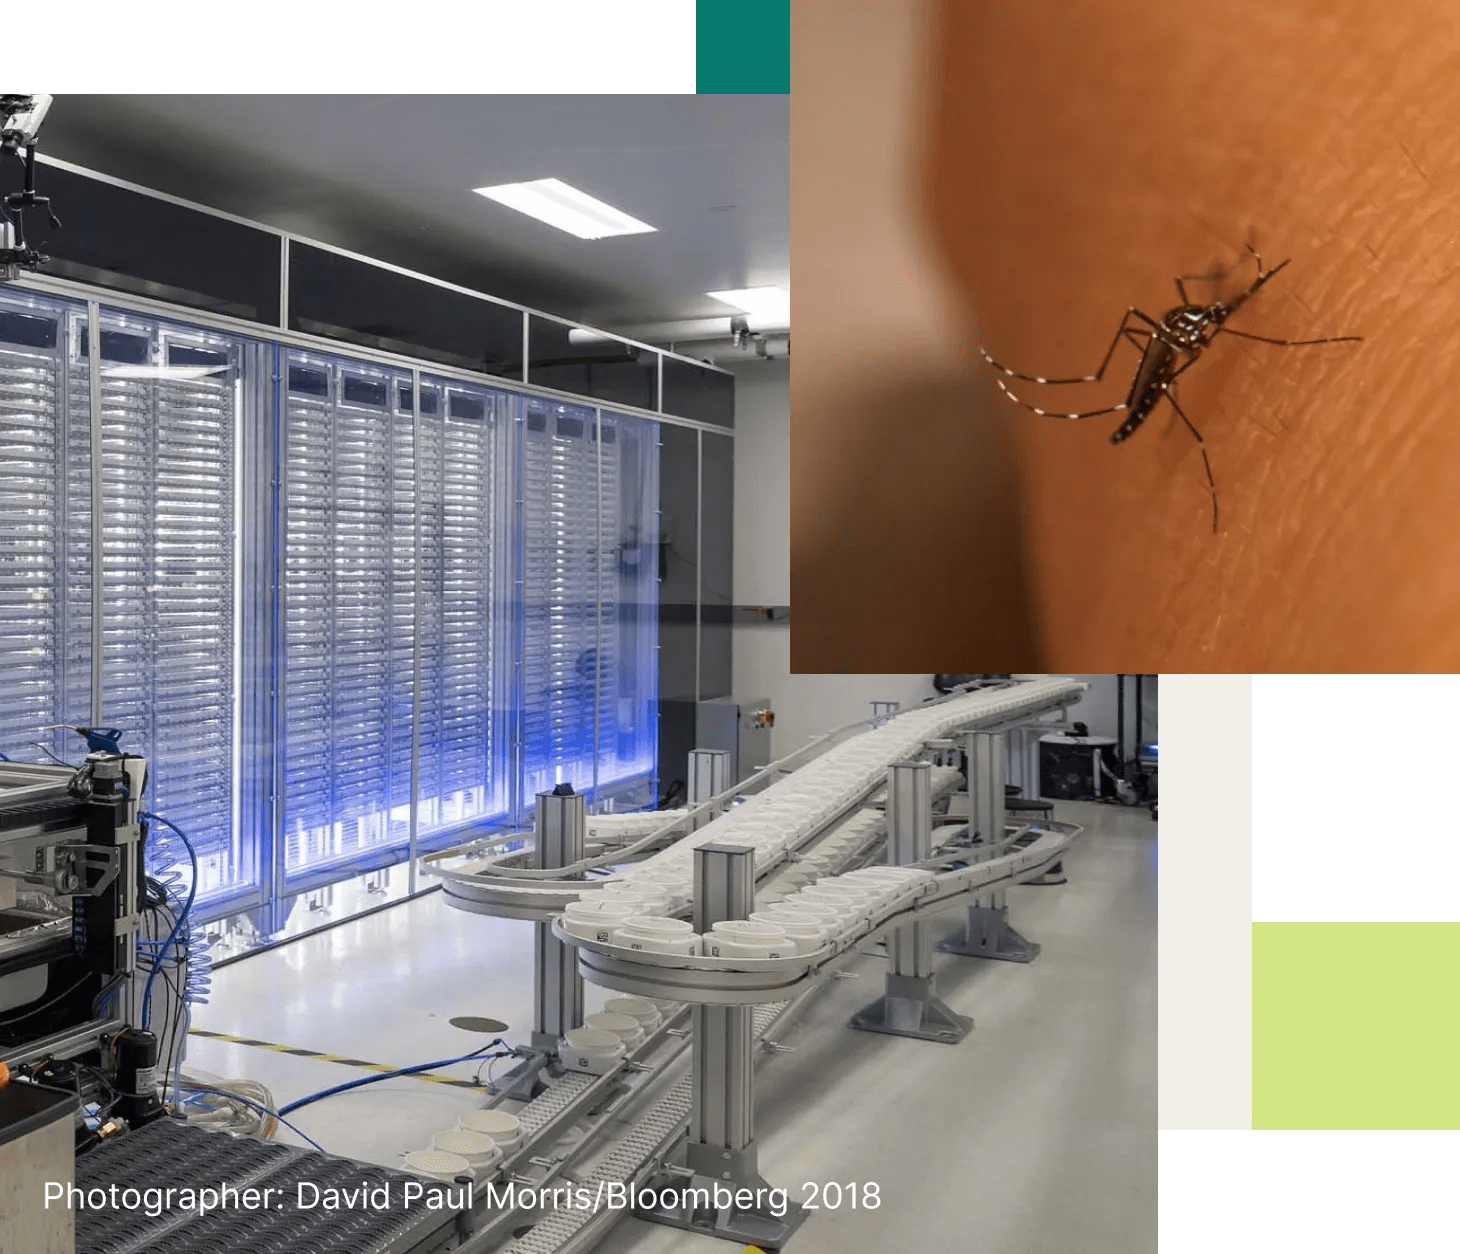 Collage of photos depicting Debug science and tech for reducing mosquito populations that spread disease, like dengue and Zika.